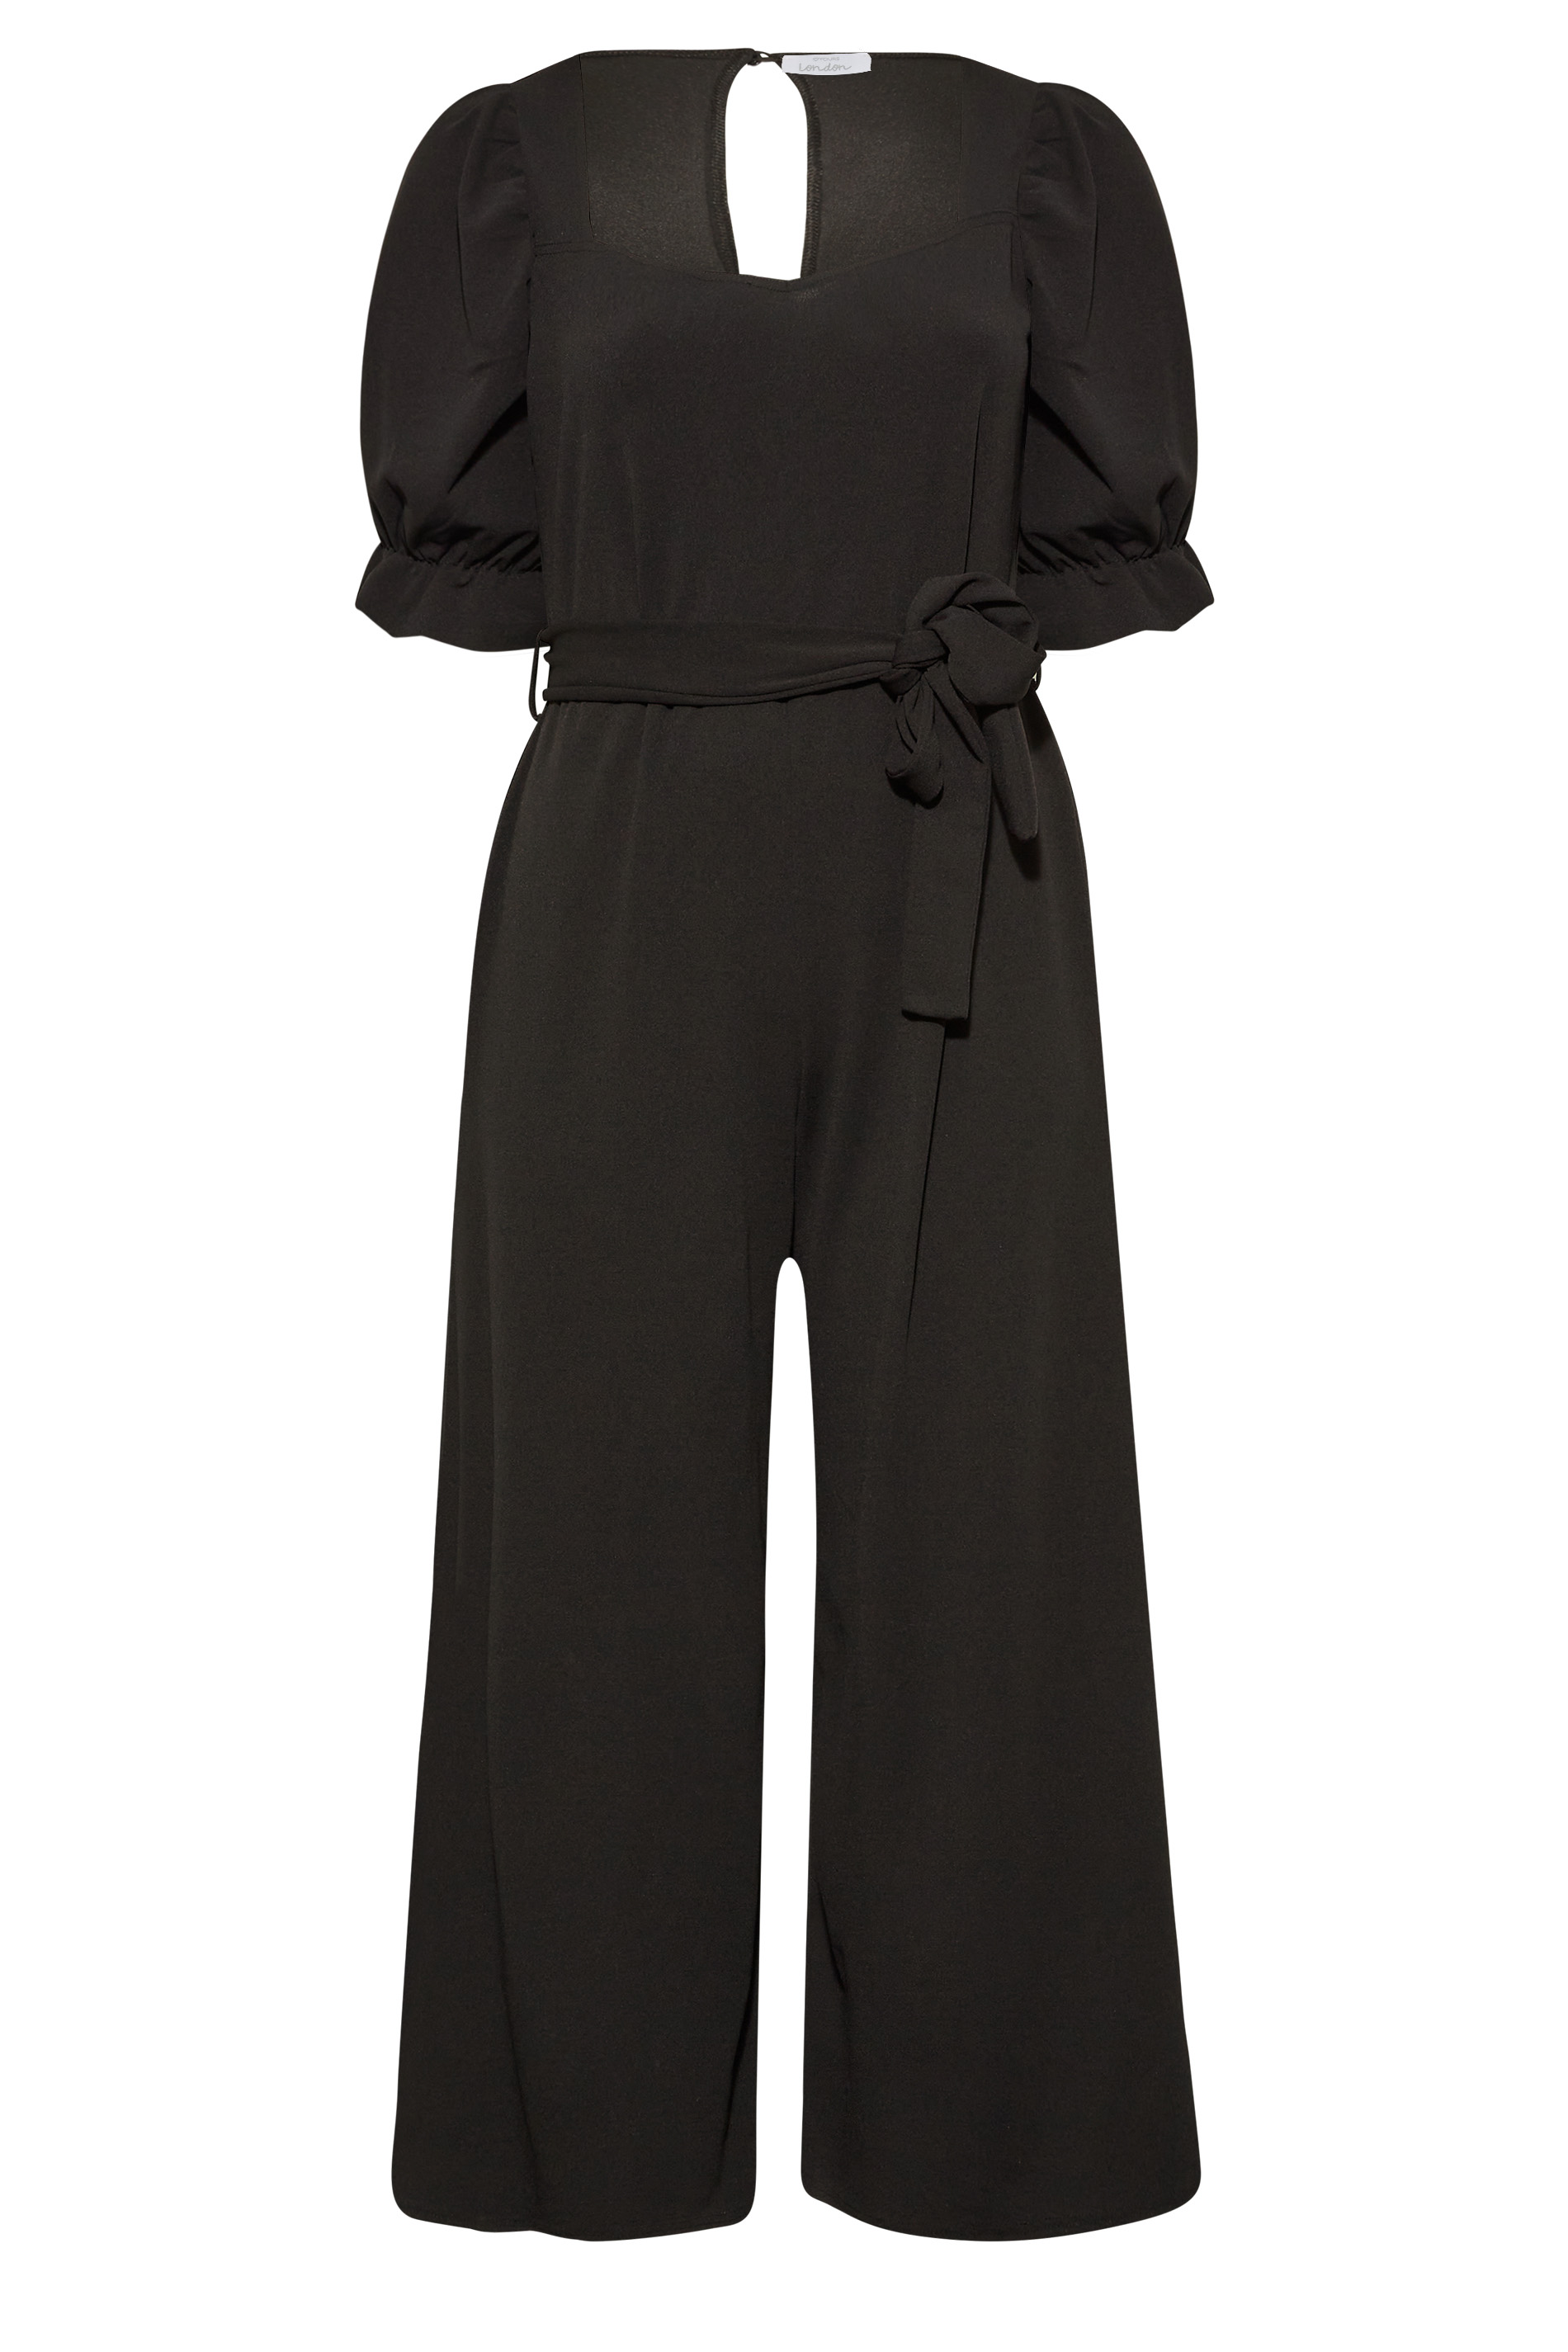 YOURS LONDON Plus Size Black Sweetheart Puff Sleeve Jumpsuit